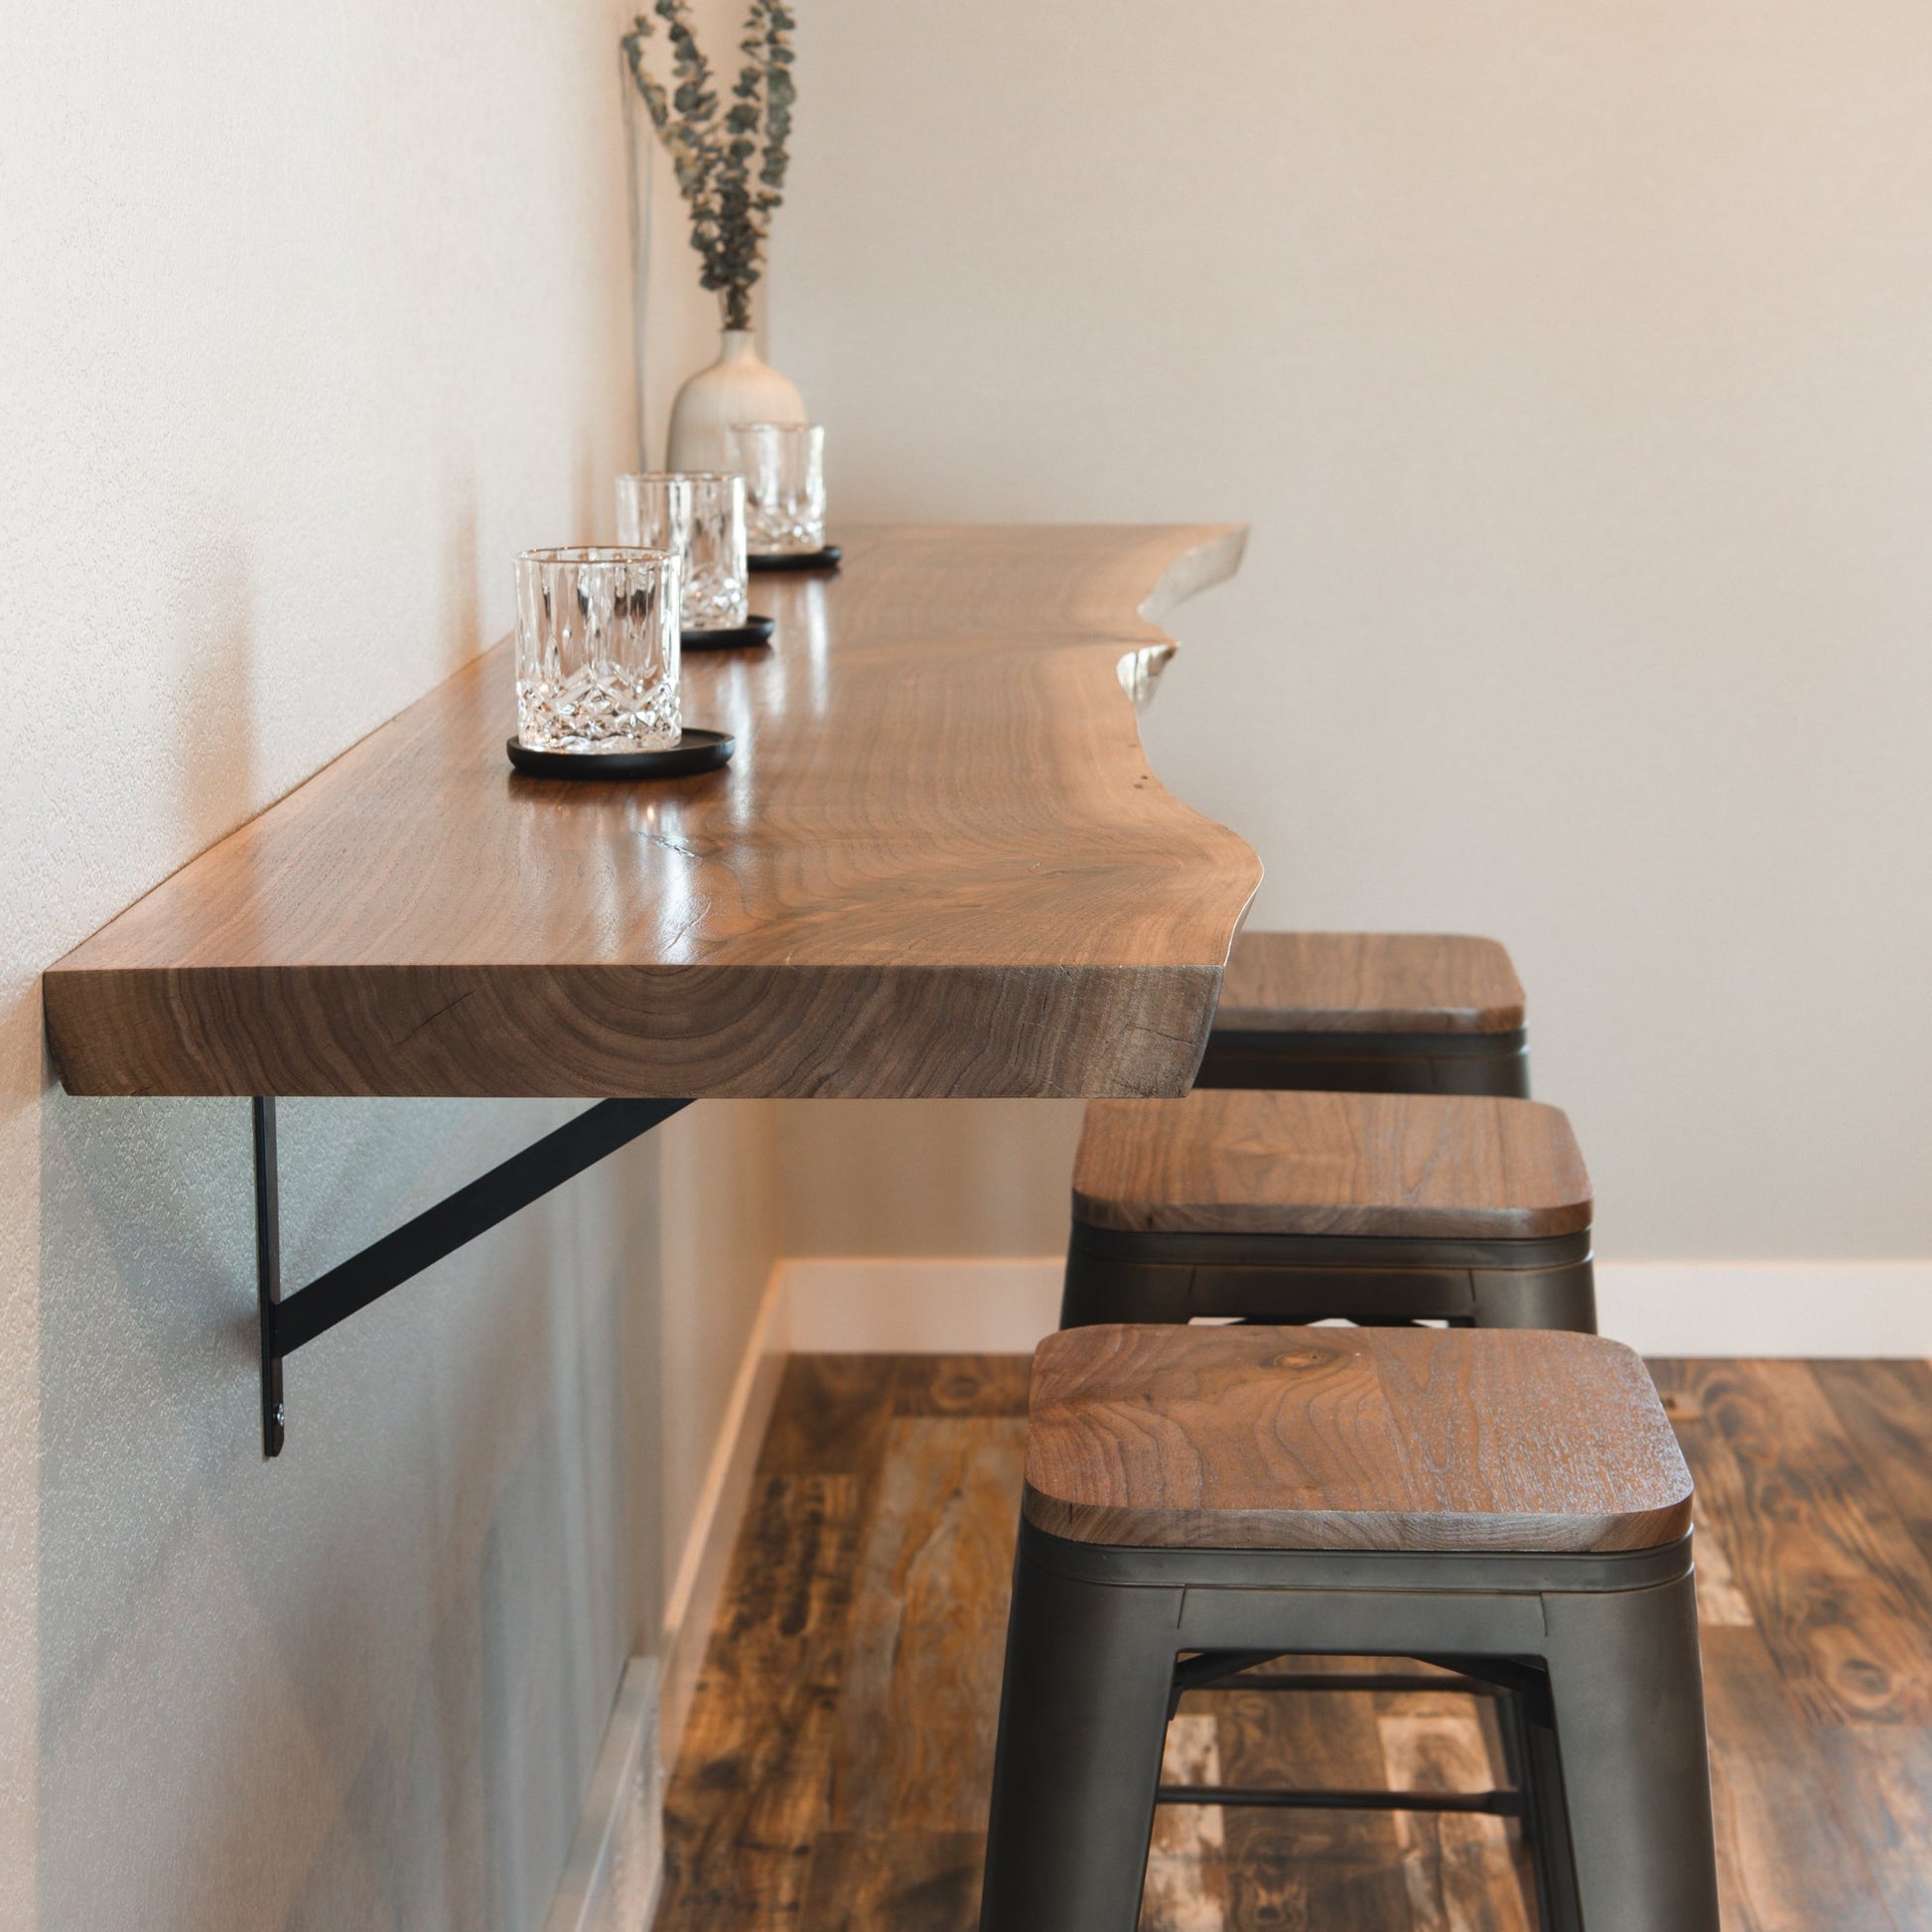 The Live Edge Walnut Floating Bar Table - FargoWoodworks